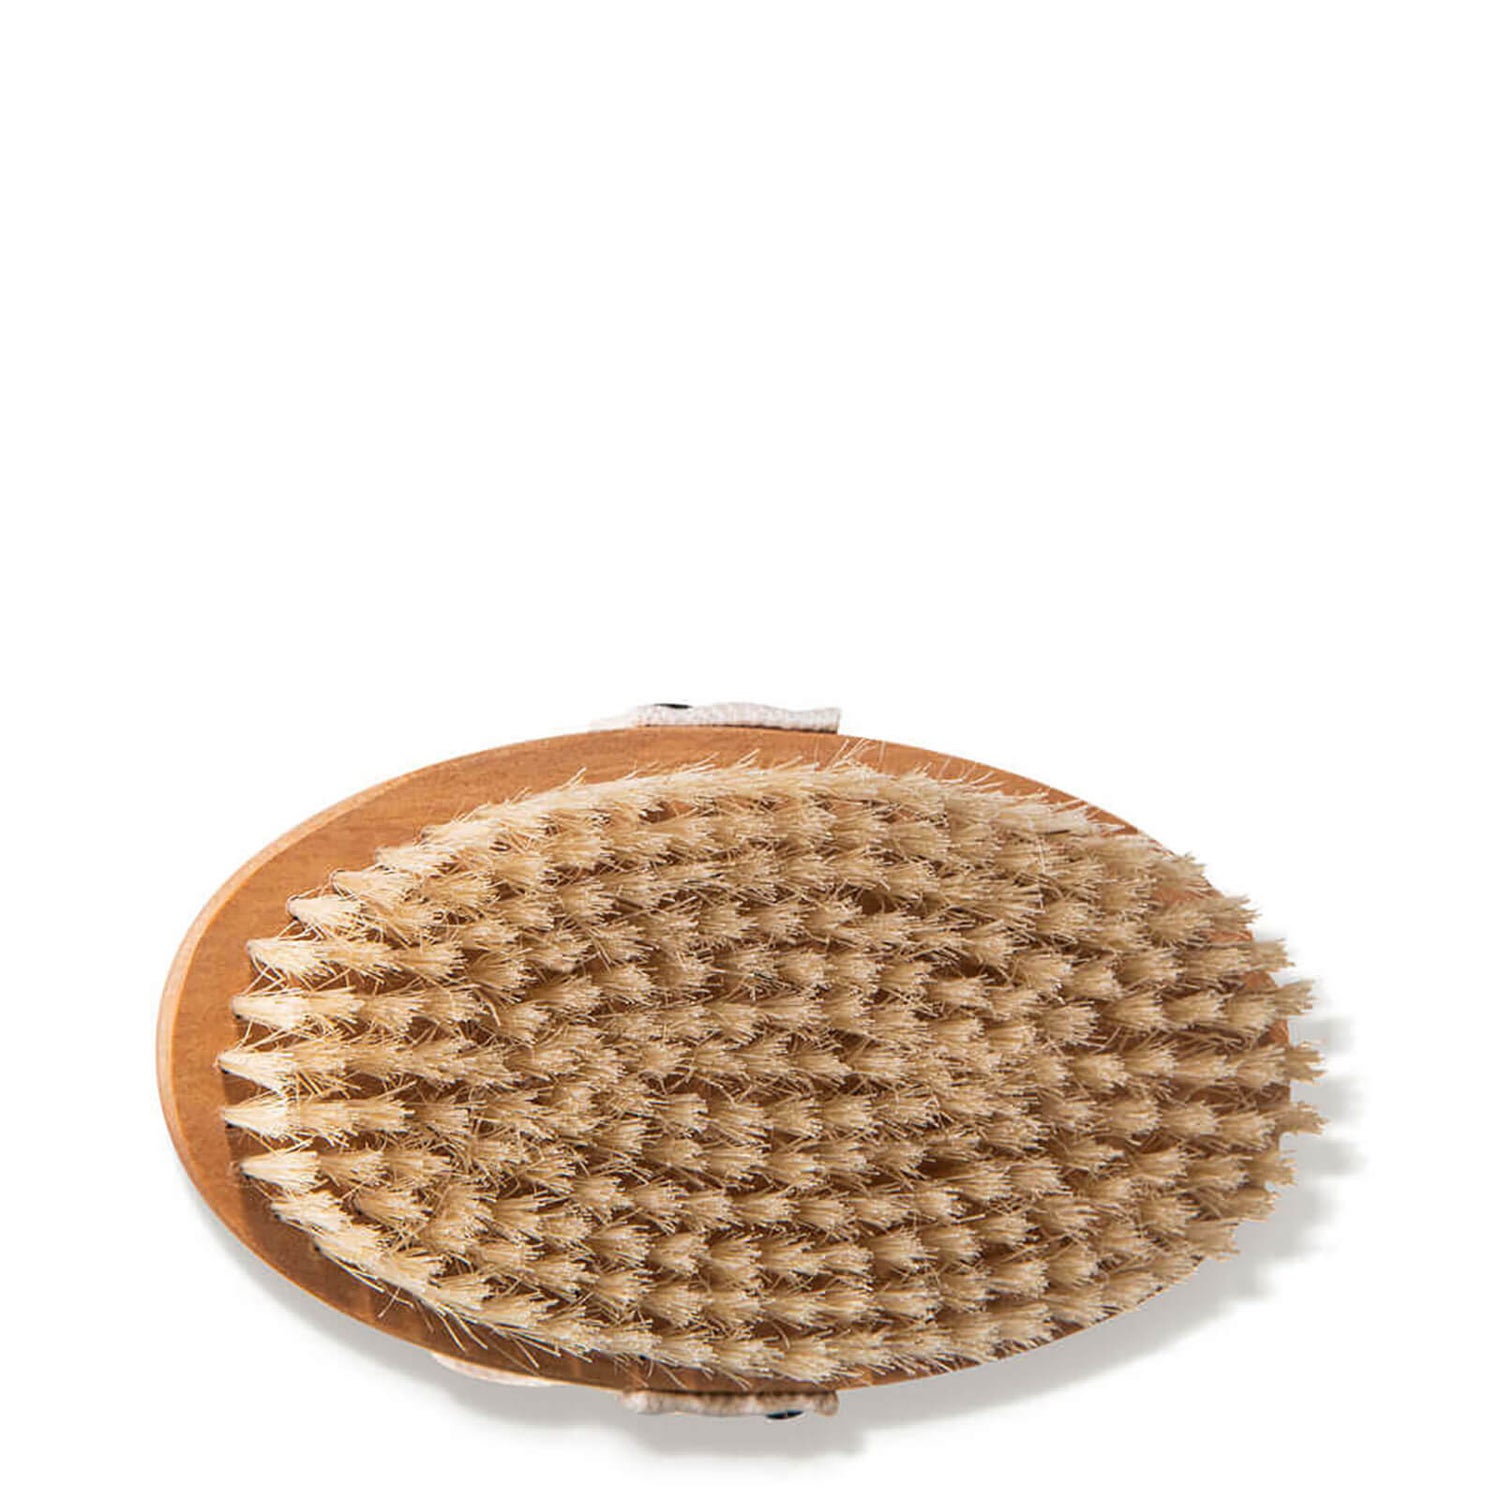 Dermstore Collection Dry Brush Exfoliator With Handle (1 piece)